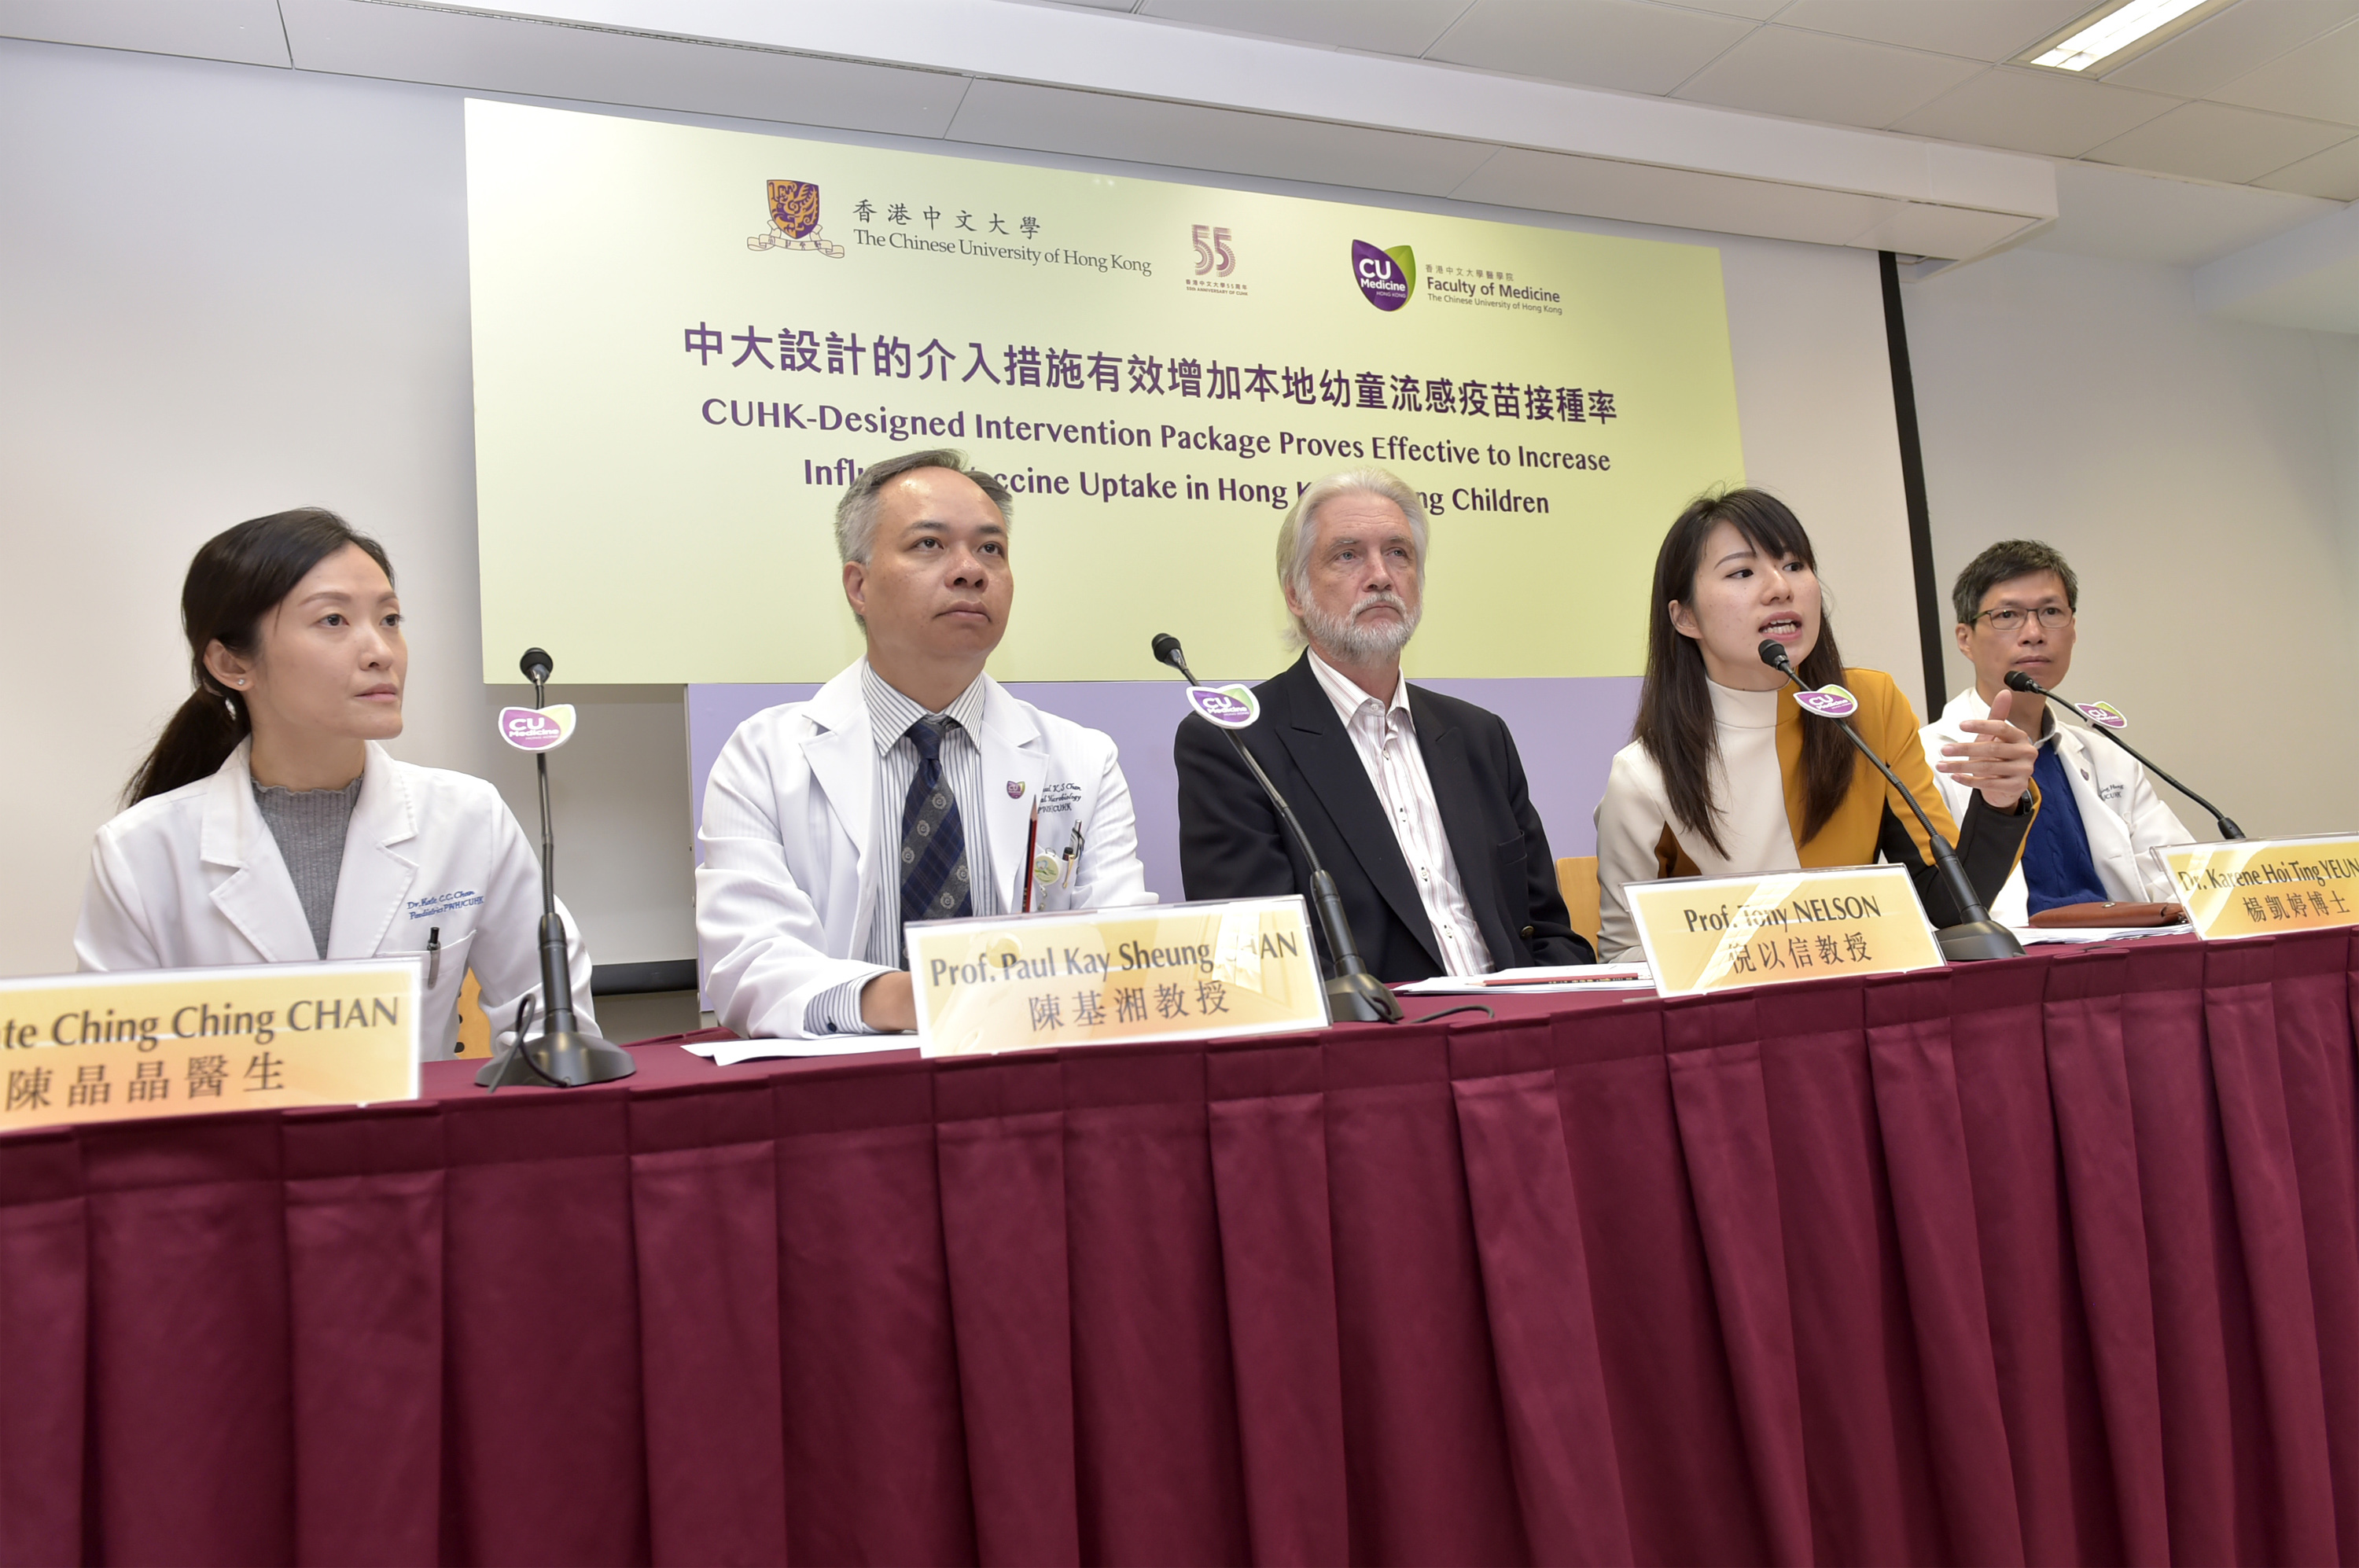 The team hopes that the influenza vaccine can be incorporated into Hong Kong’s routine Childhood Immunisation Programme so as to encourage more parents to have their children vaccinated.